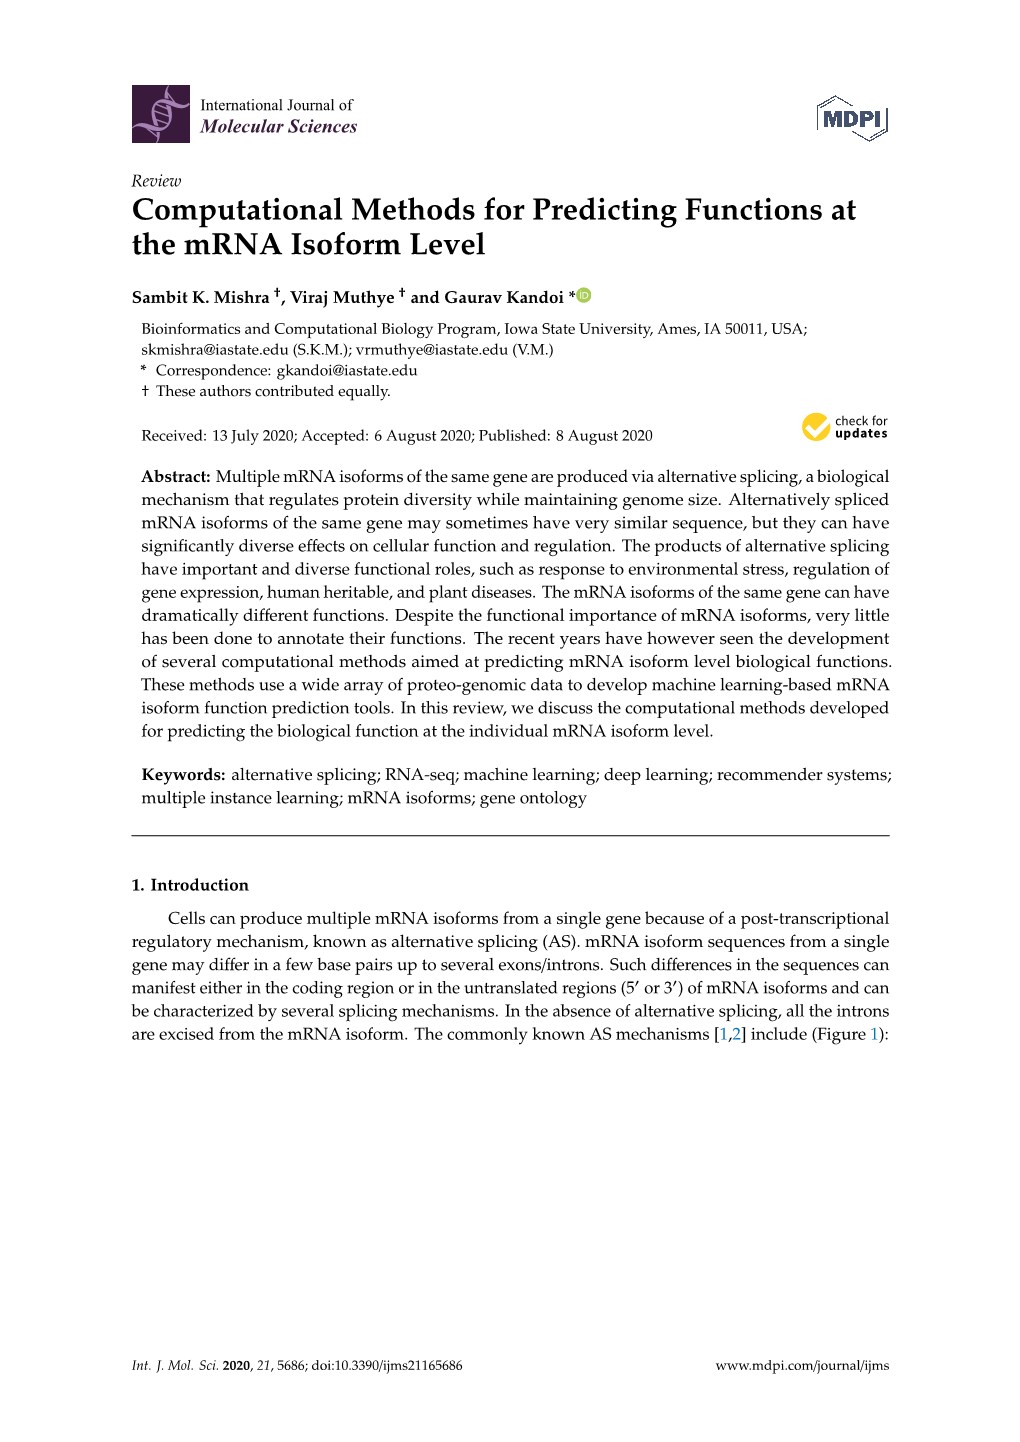 Computational Methods for Predicting Functions at the Mrna Isoform Level